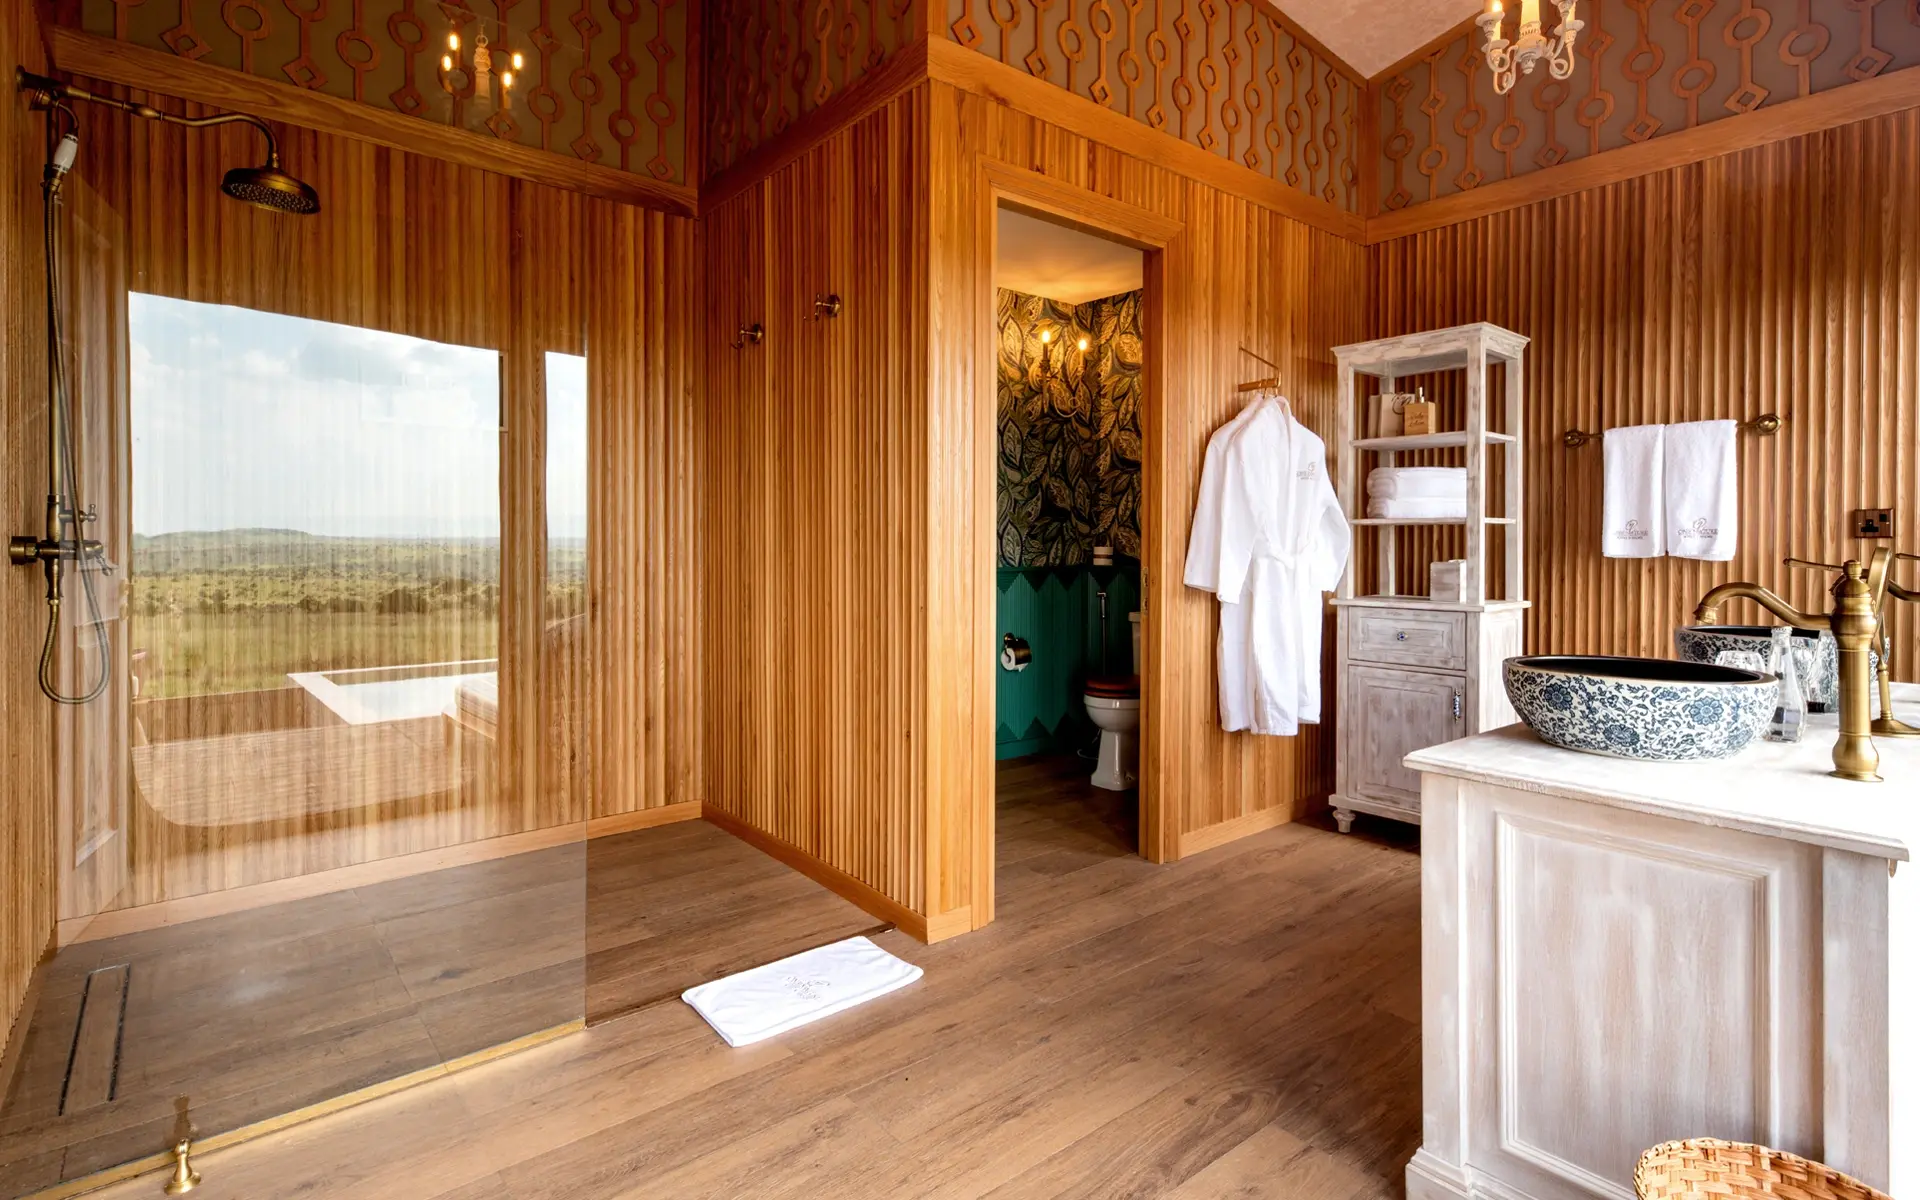 Indoor shower in the ensuite bathroom of one-bedroom villa at One Nature Mara in the Serengeti.